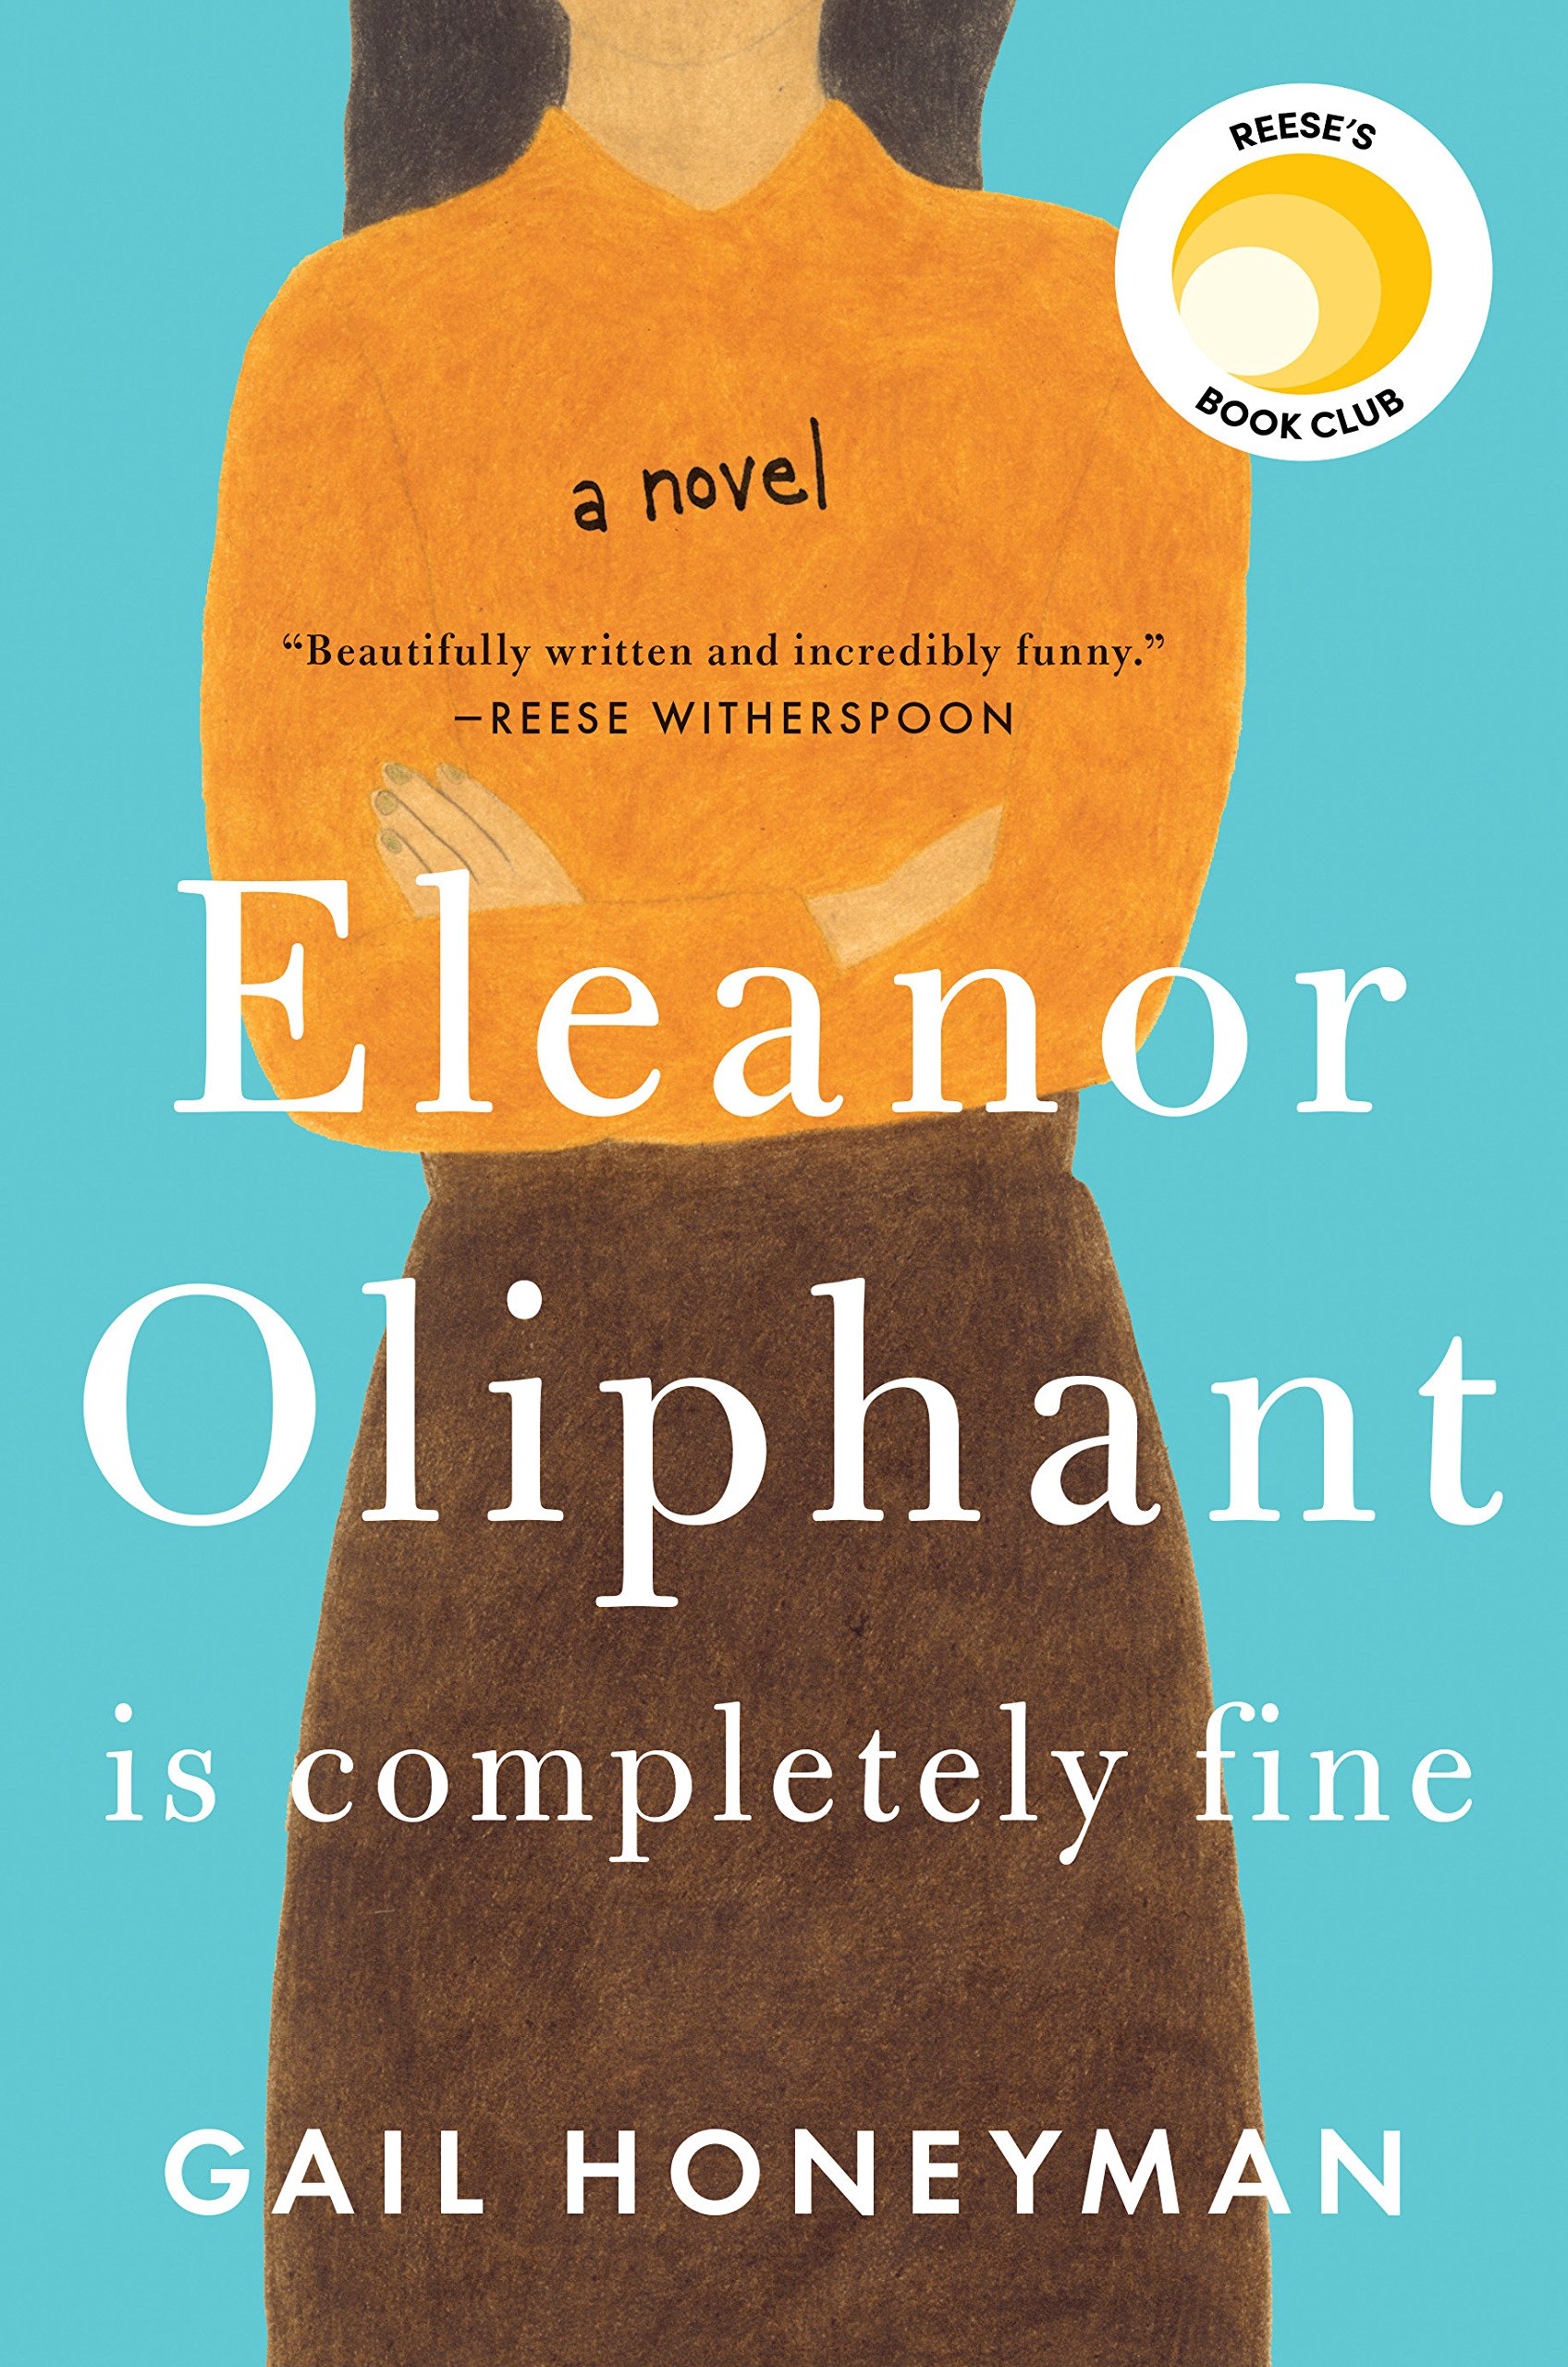 Dumbo Lit Book Club: Eleanor Oliphant is Completely Fine by Gail Honeyman